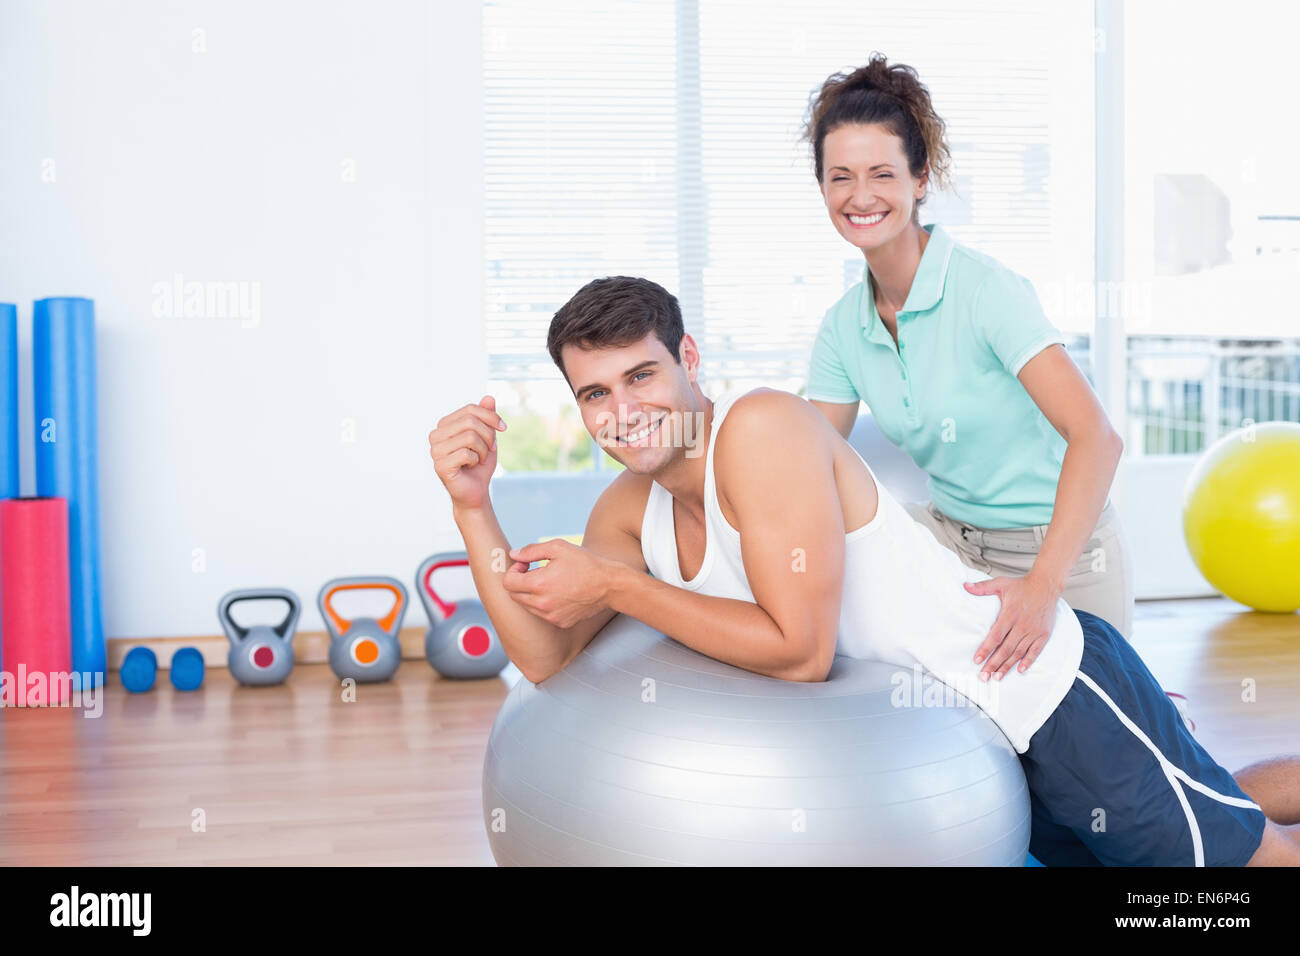 Trainer helping man with exercise ball Banque D'Images